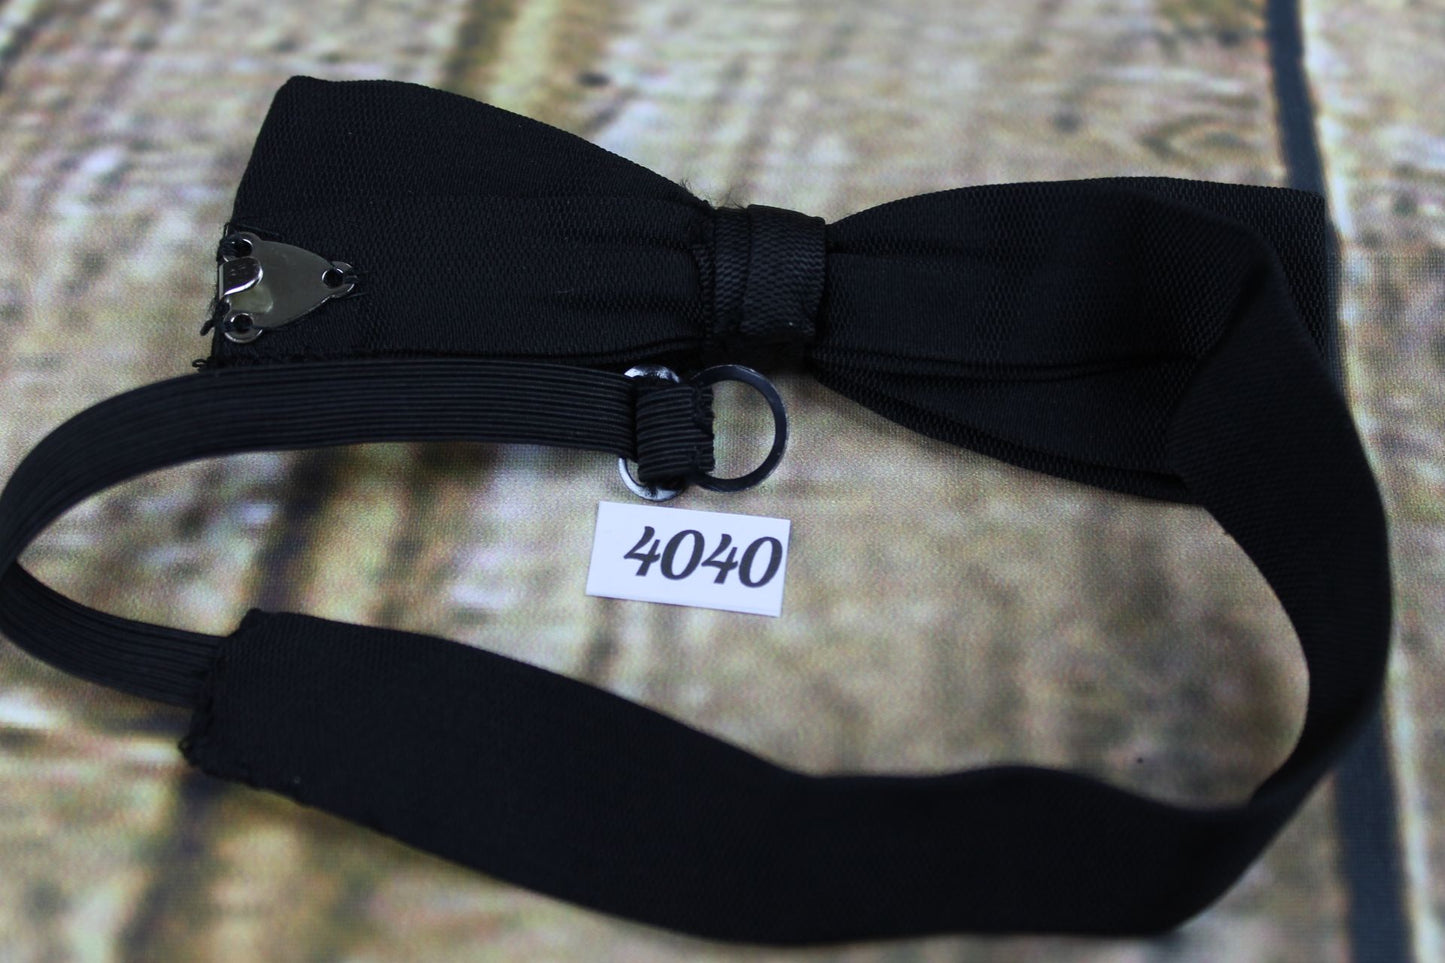 Vintage Classic Black Grosgrain Pre-Tied Bow Tie Adjusts to Fit All Sizes